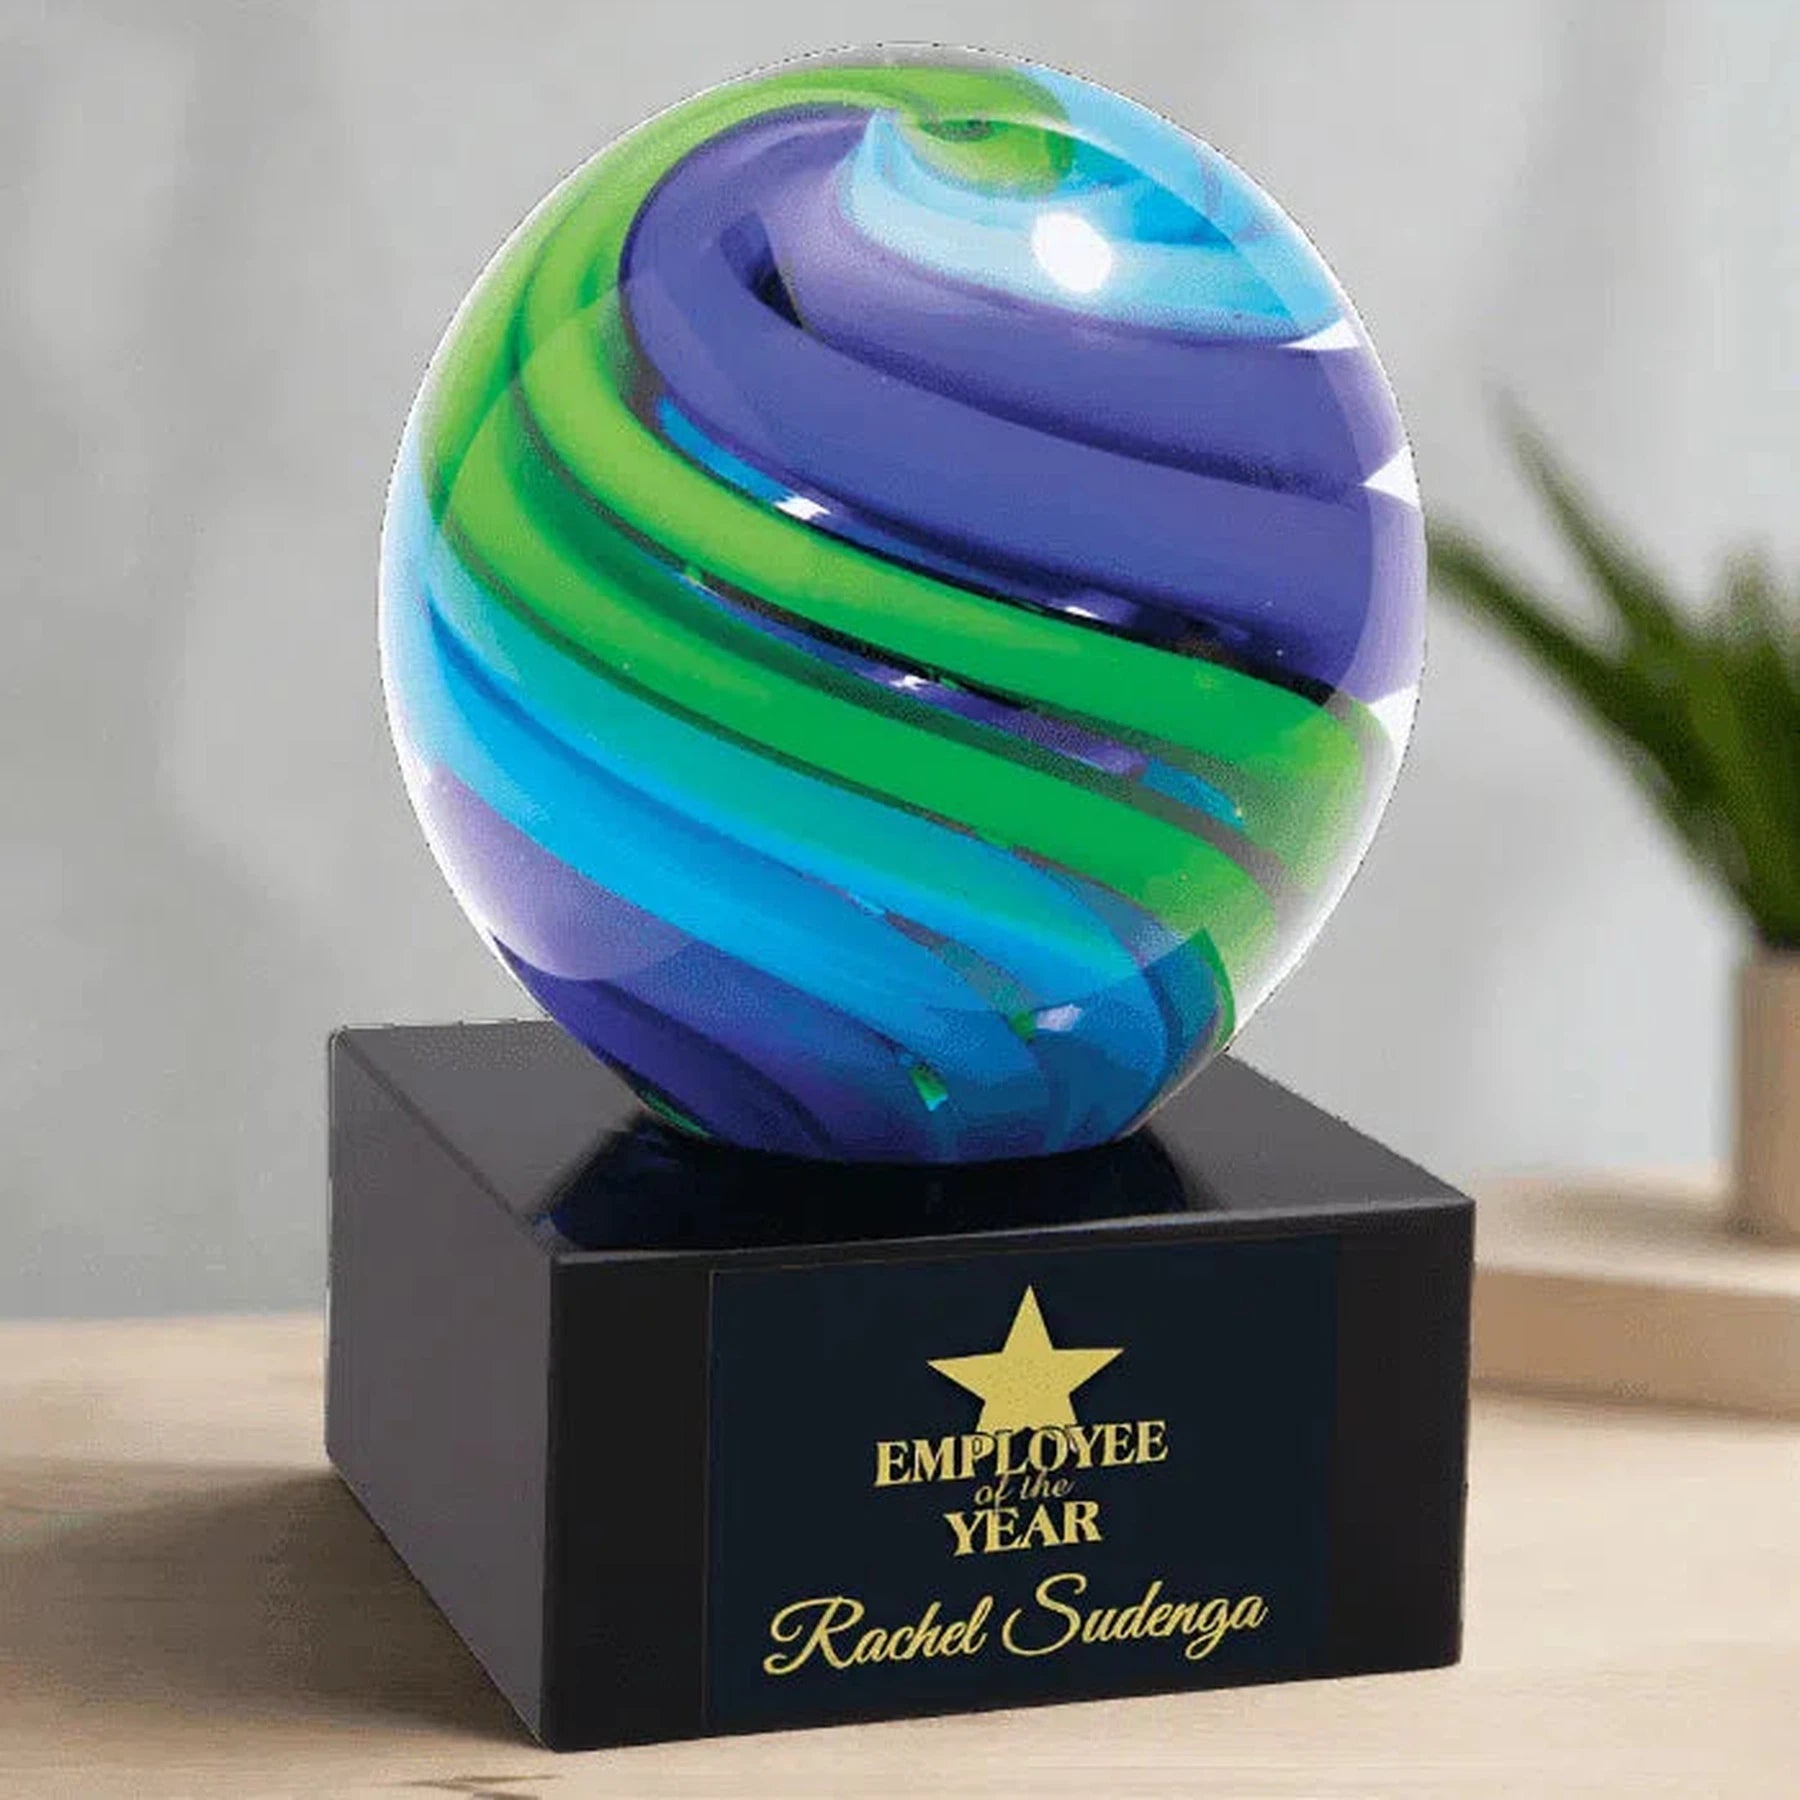 5" Green and Blue Two-Tone Sphere Art Glass Award